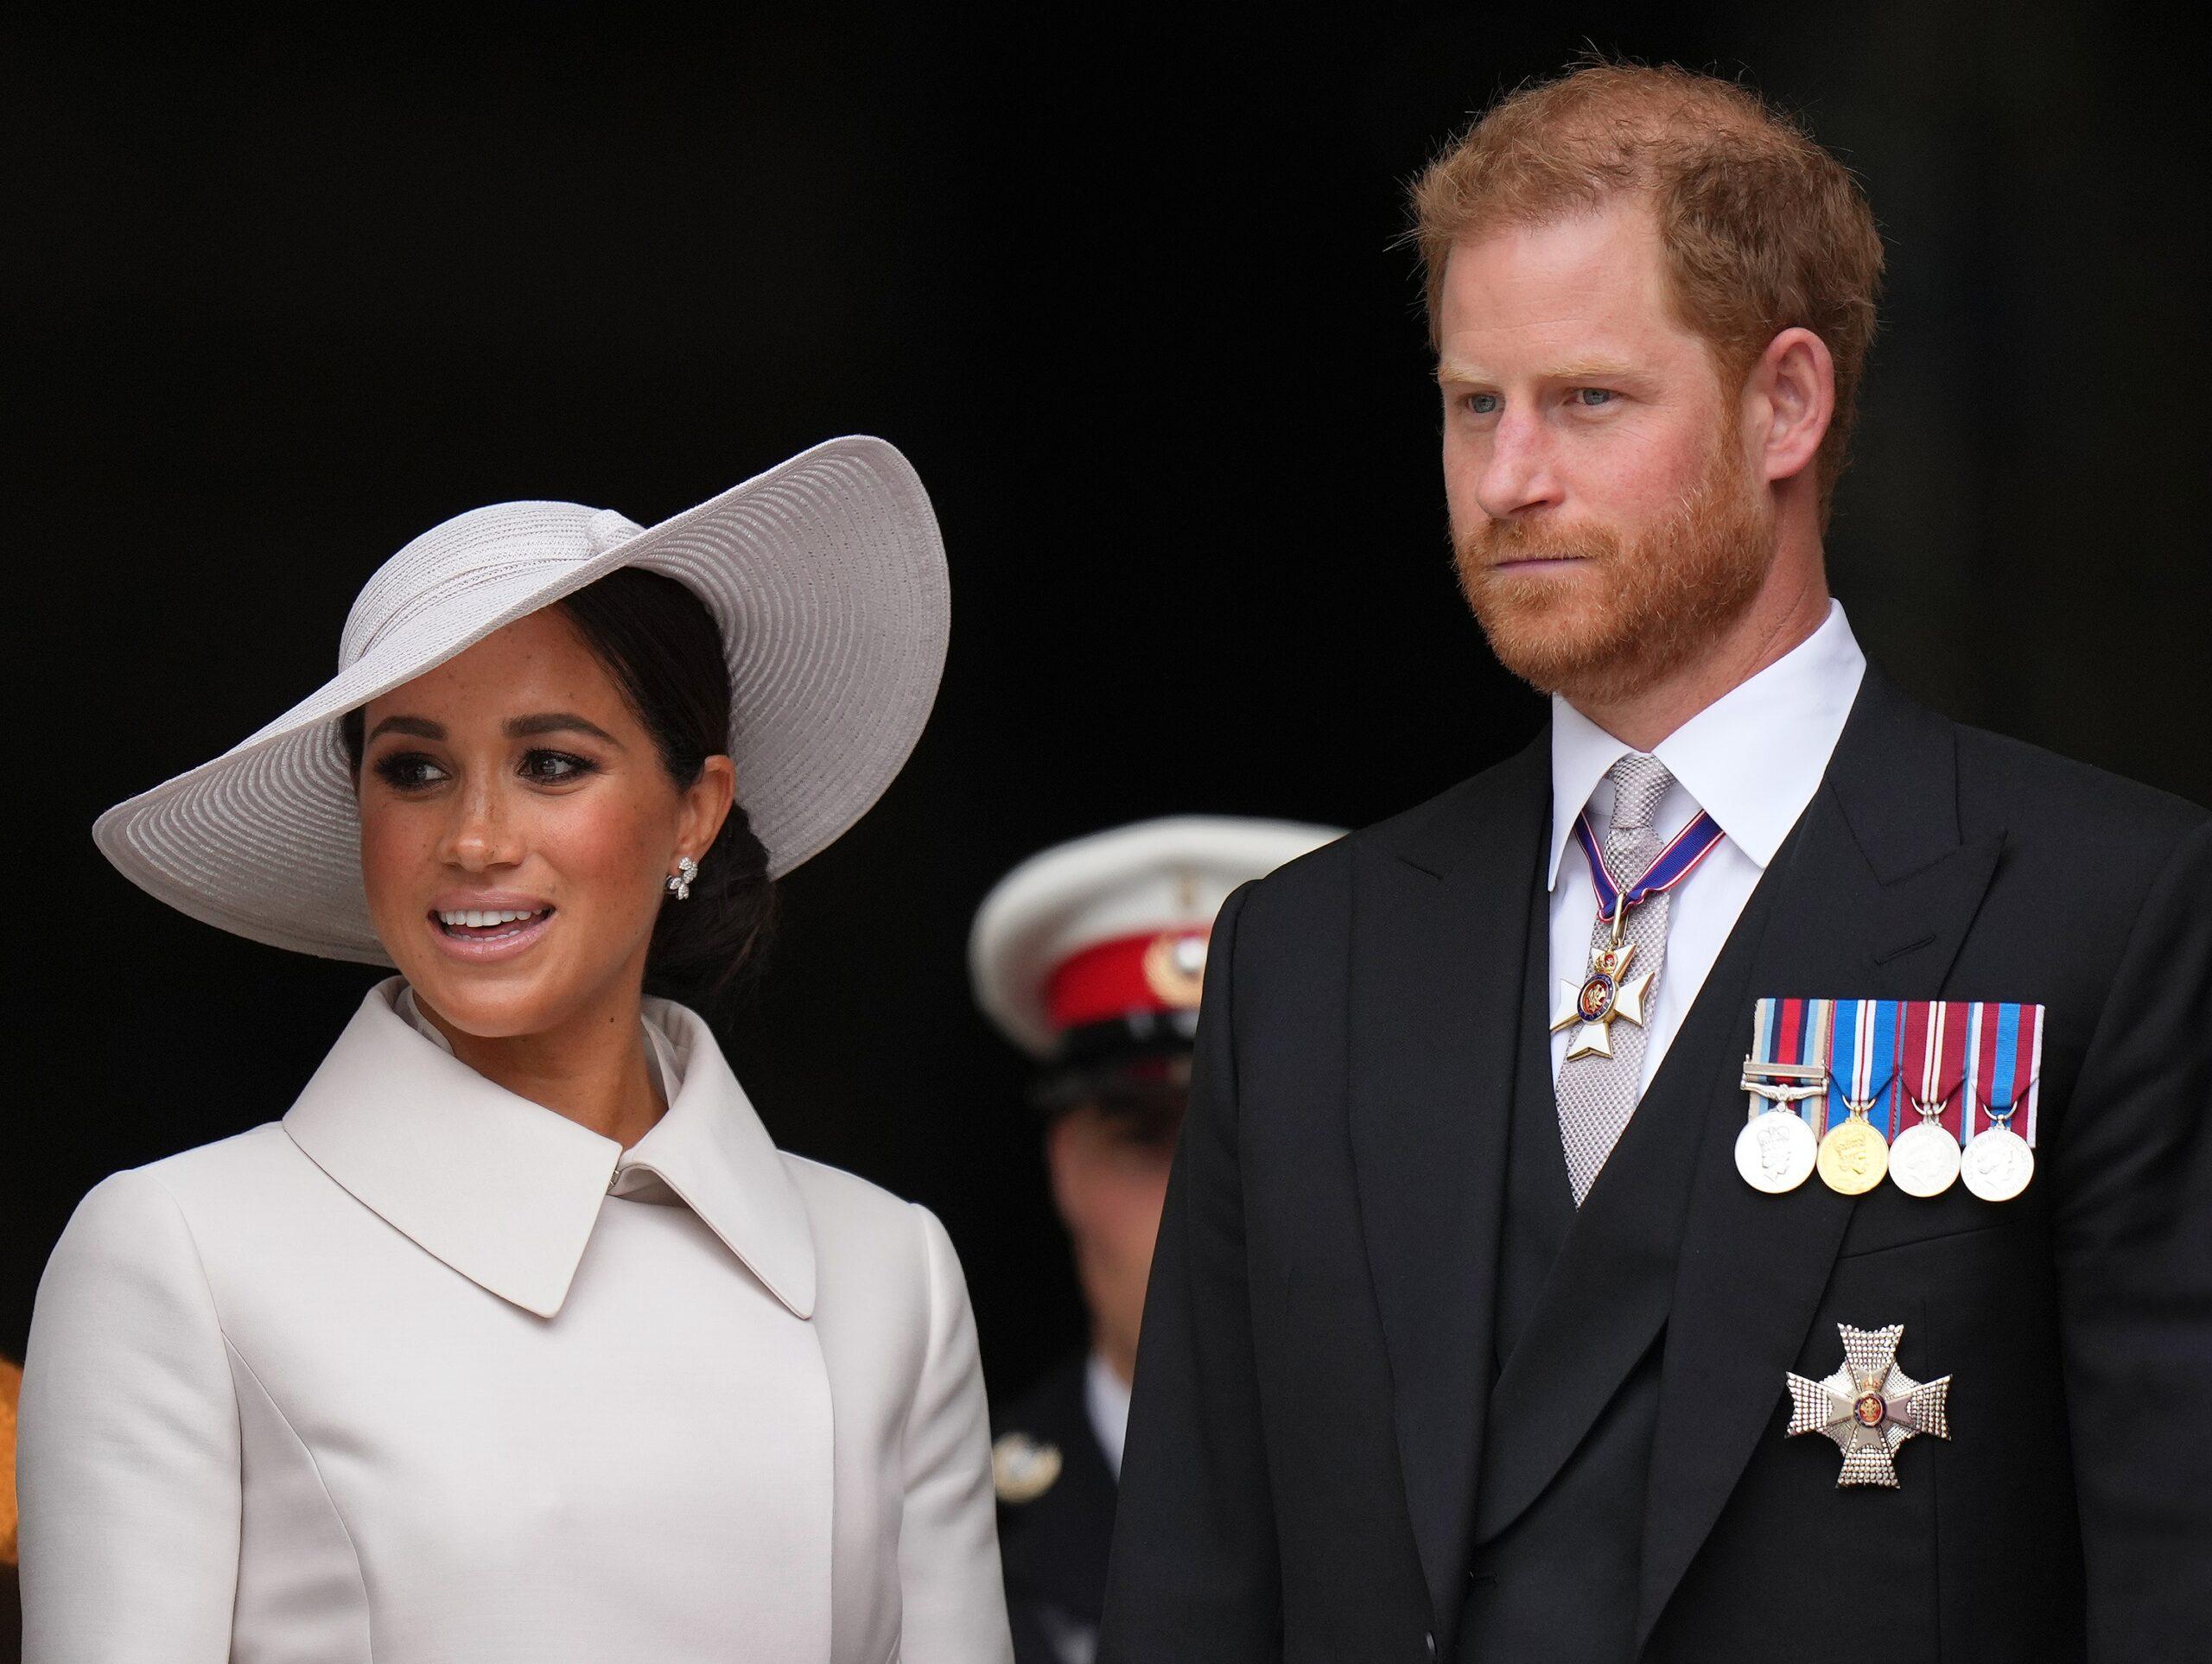 National Thanksgiving service to celebrate Her Majesty The Queen's platinum jubilee, at St Paul's Cathedral, London, UK, on ​​June 3, 2022. June 3, 2022 Pictured: Meghan, Duchess of Sussex, Meghan Markle, Prince Harry, Duke of Sussex.